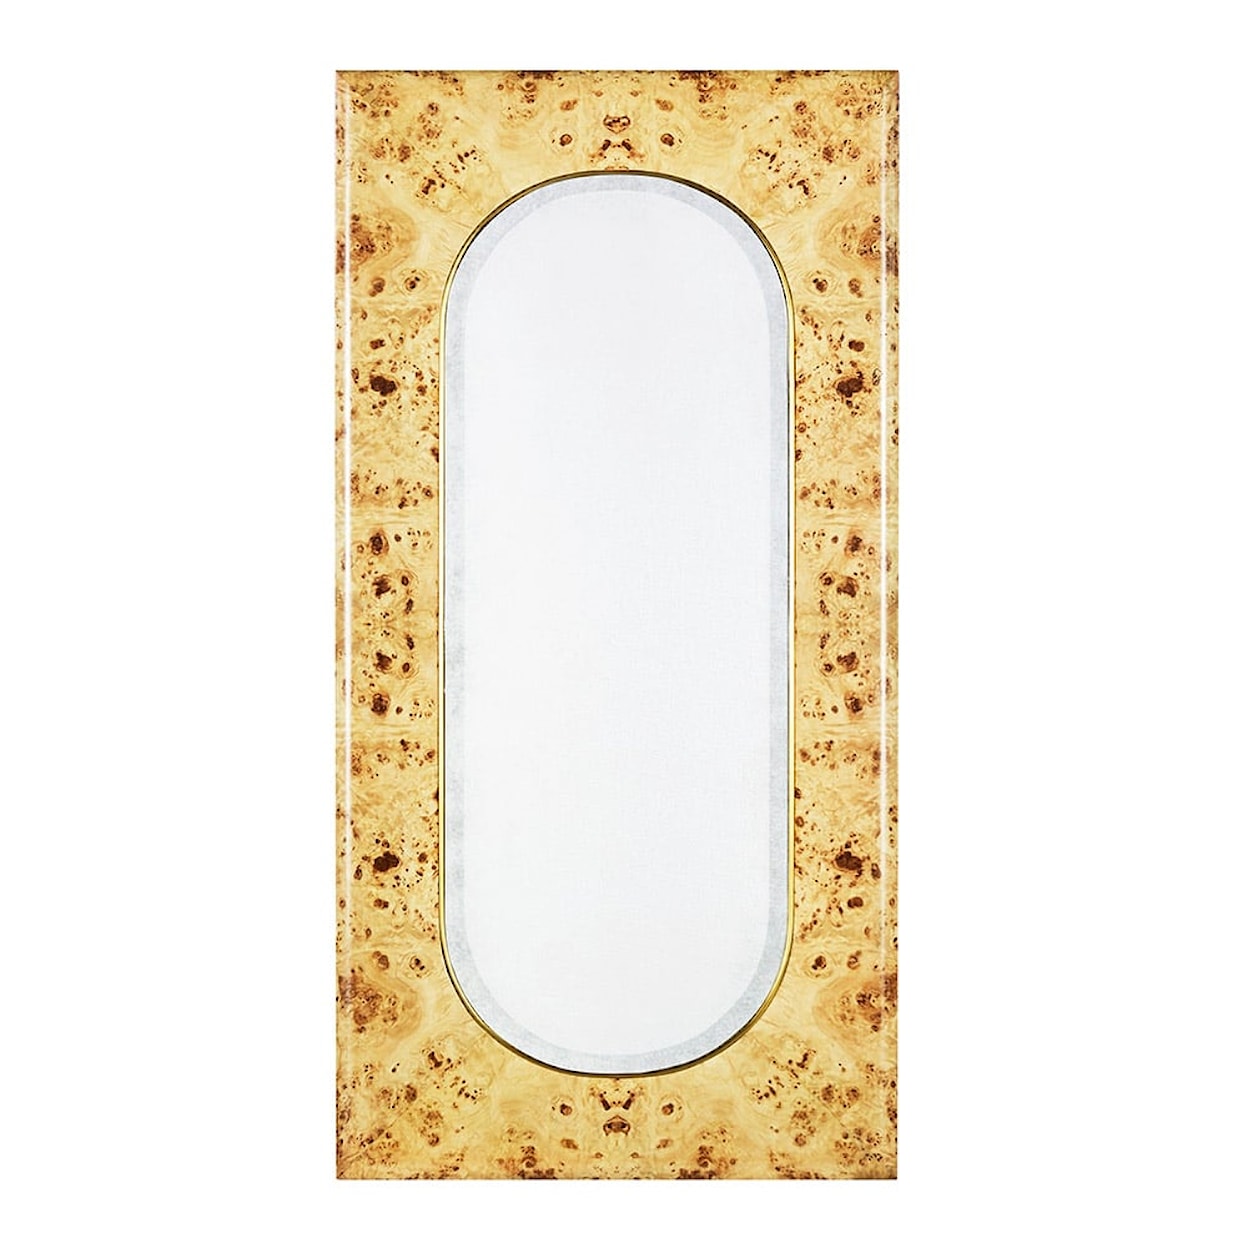 Oliver Home Furnishings Mirrors The Portal Mirror Small